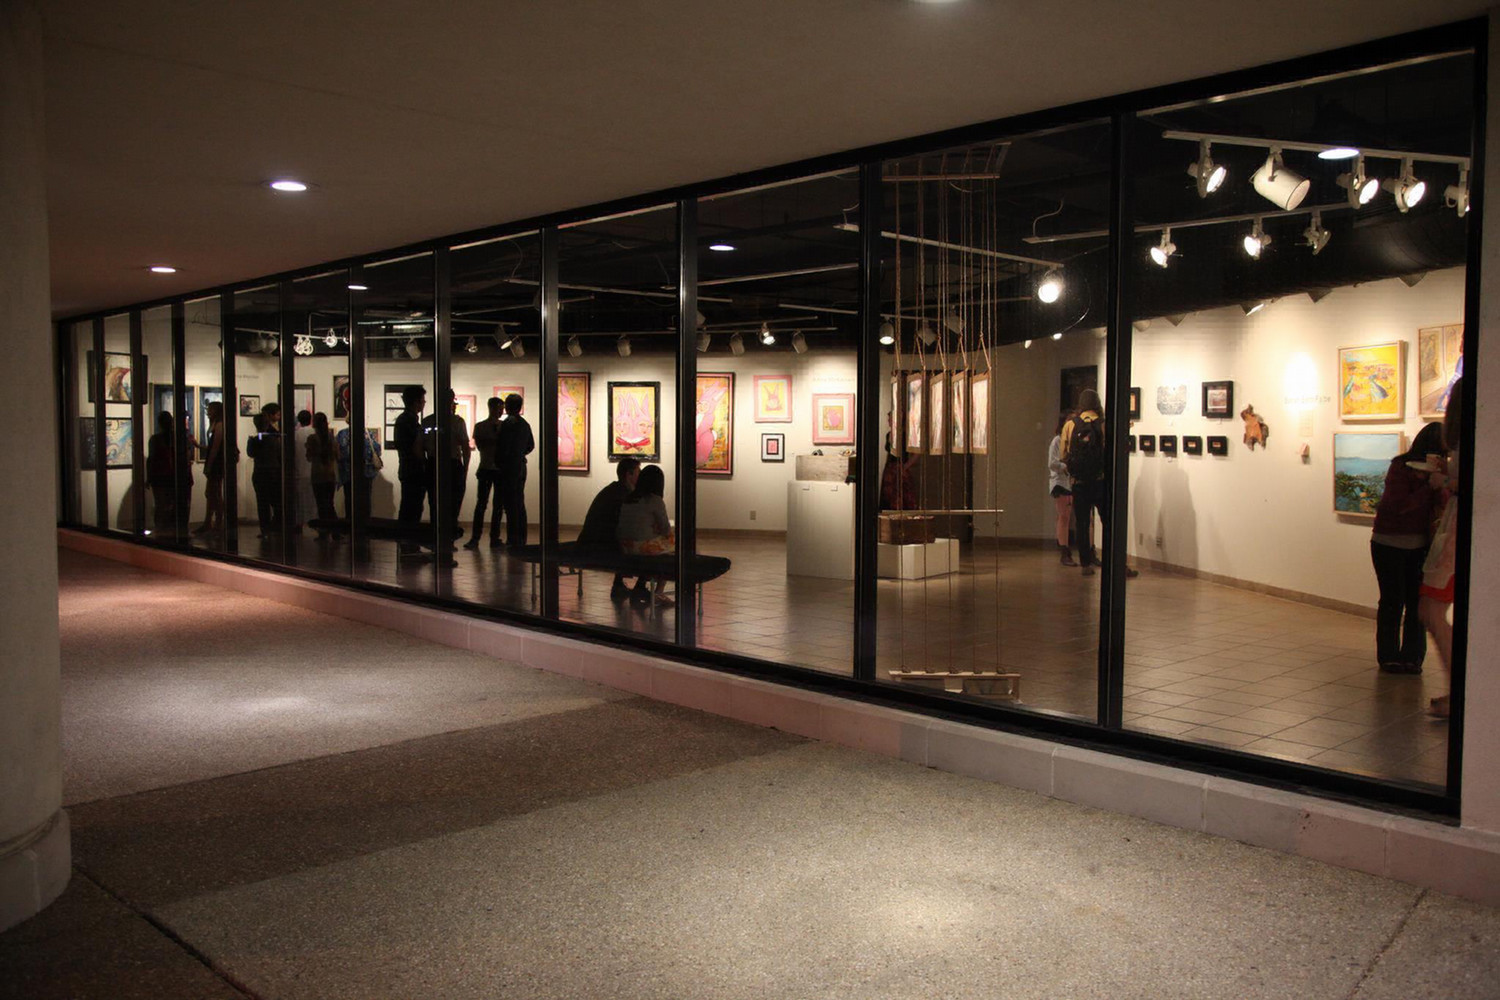 Gallery view from outside